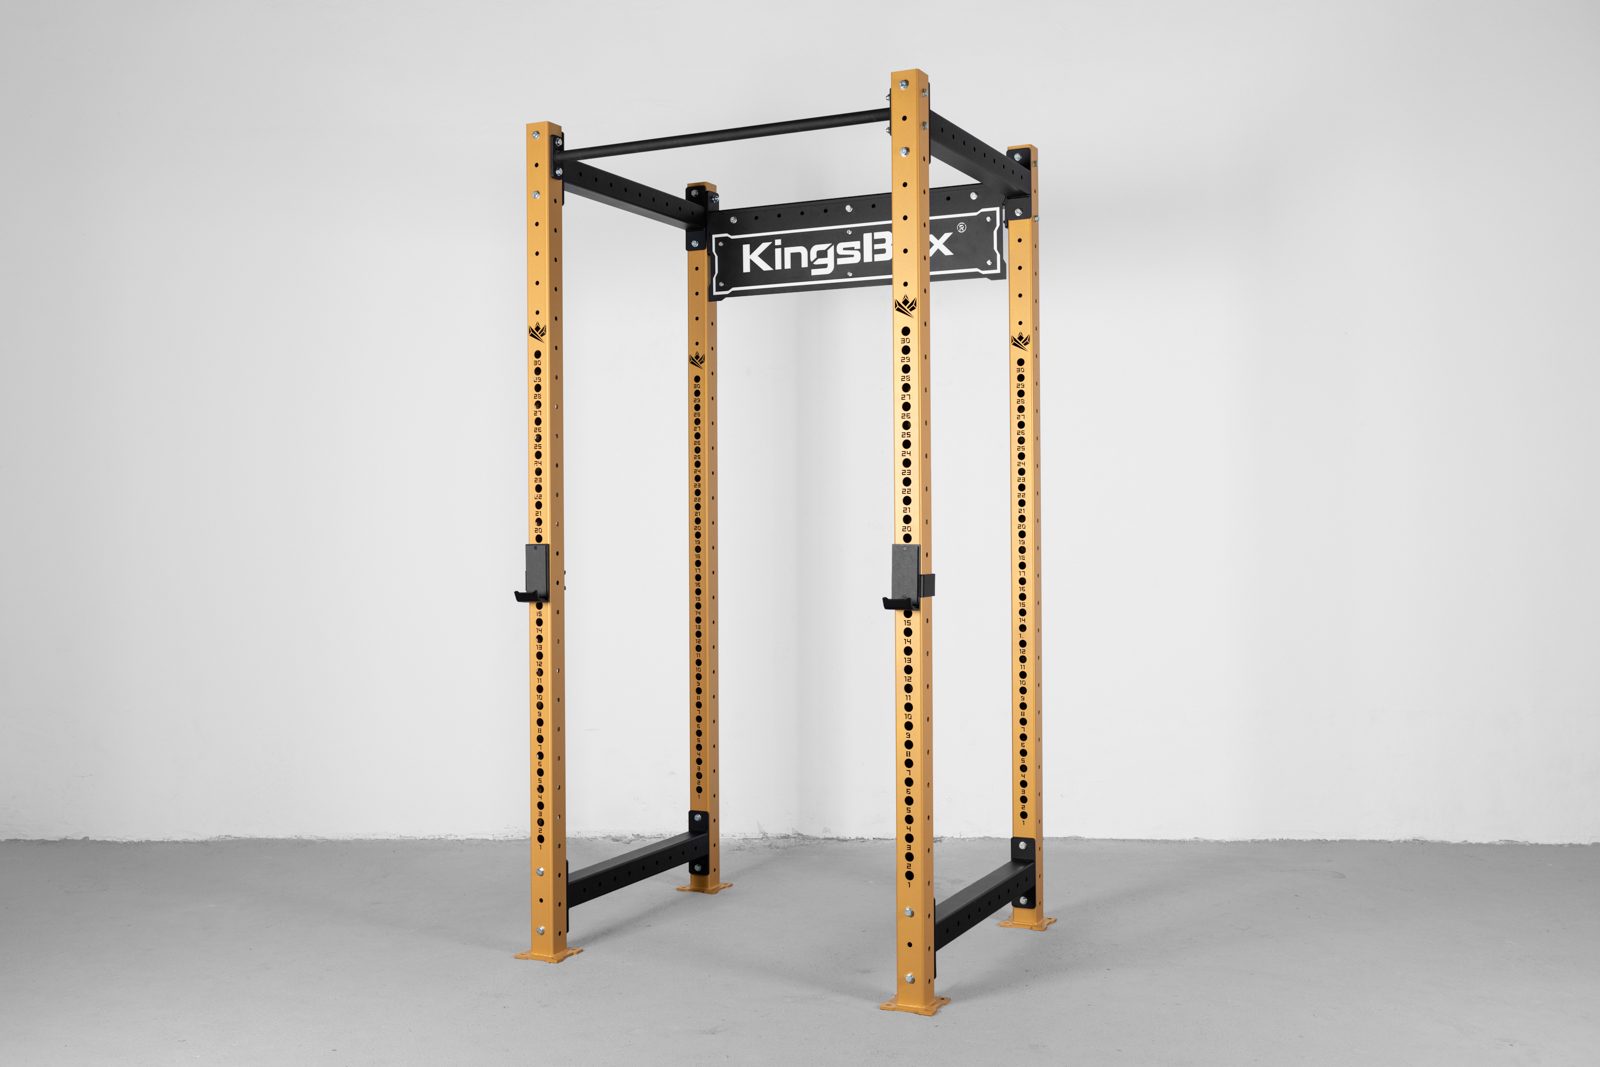 OUTLET - Mighty Power Rack CX-35 II - Gold | KingsBox